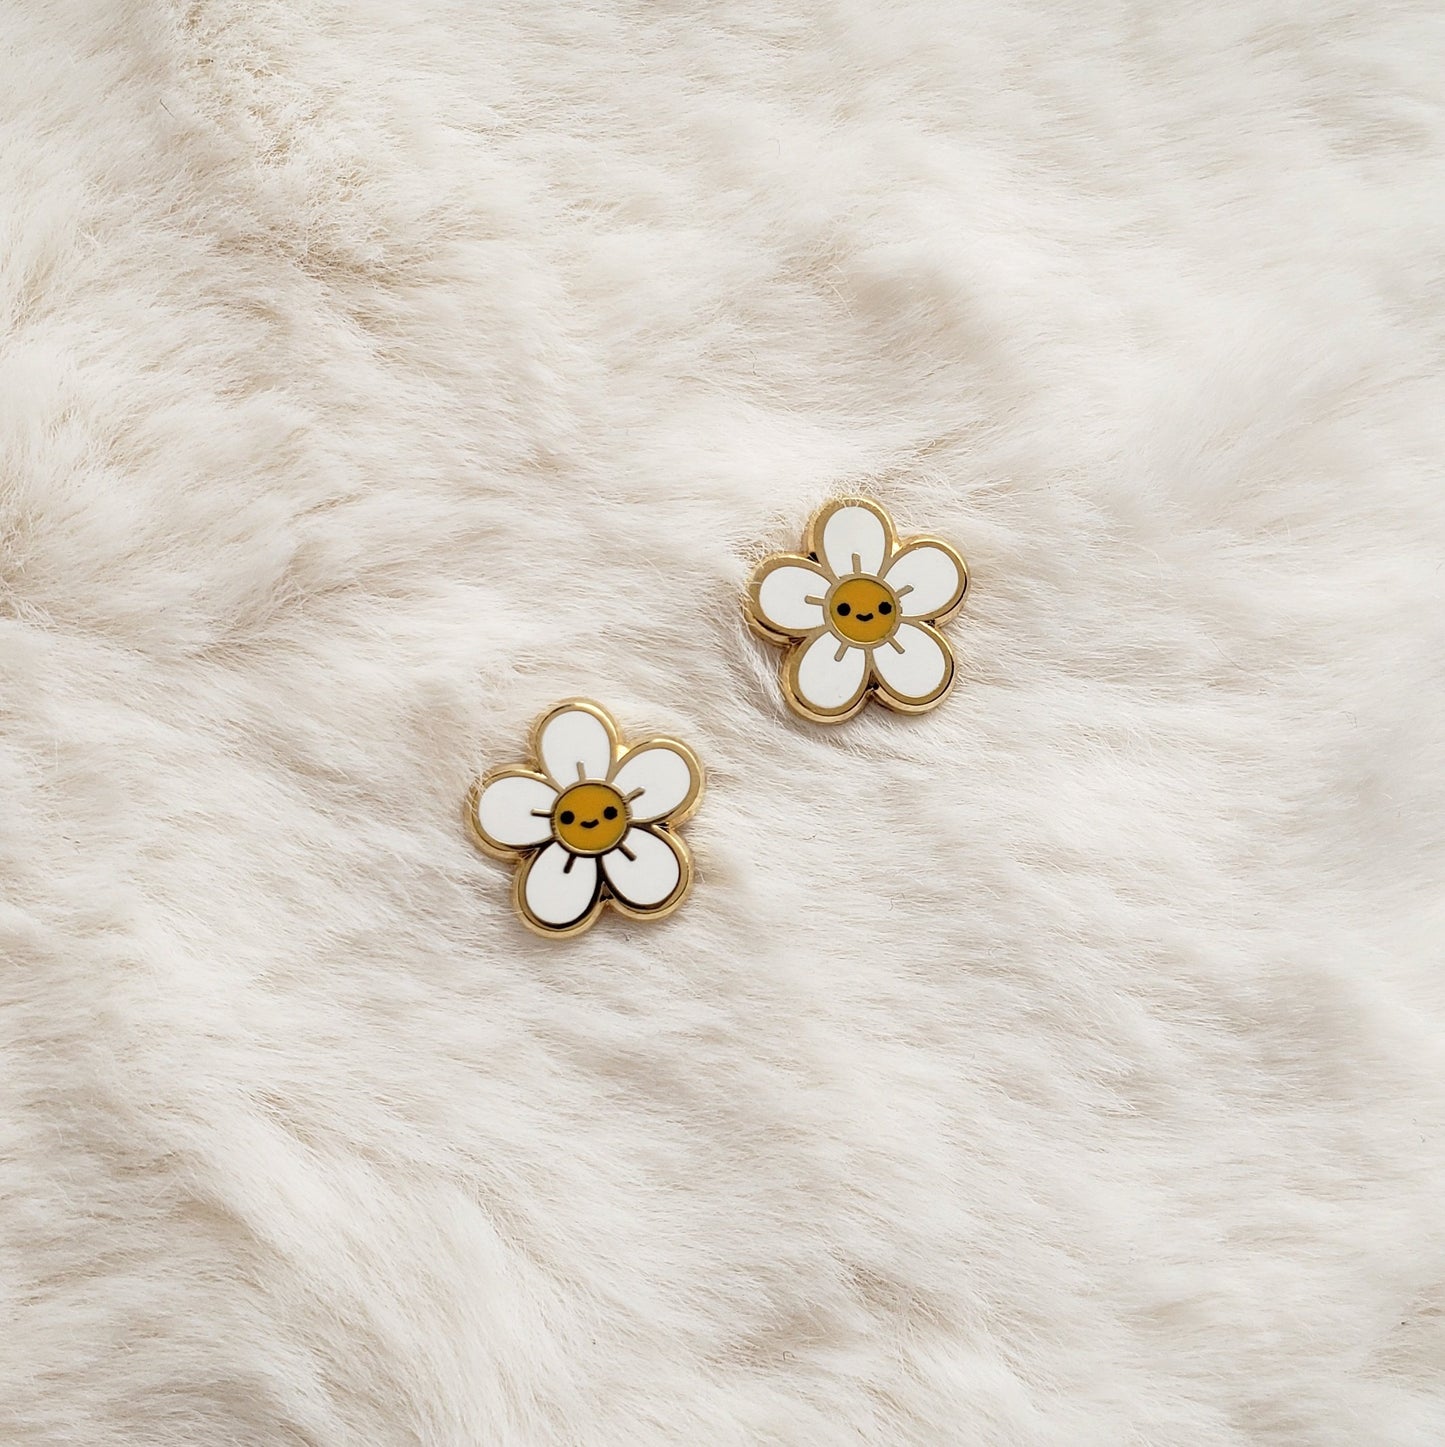 Happy Flower earrings // cute white and yellow flowers